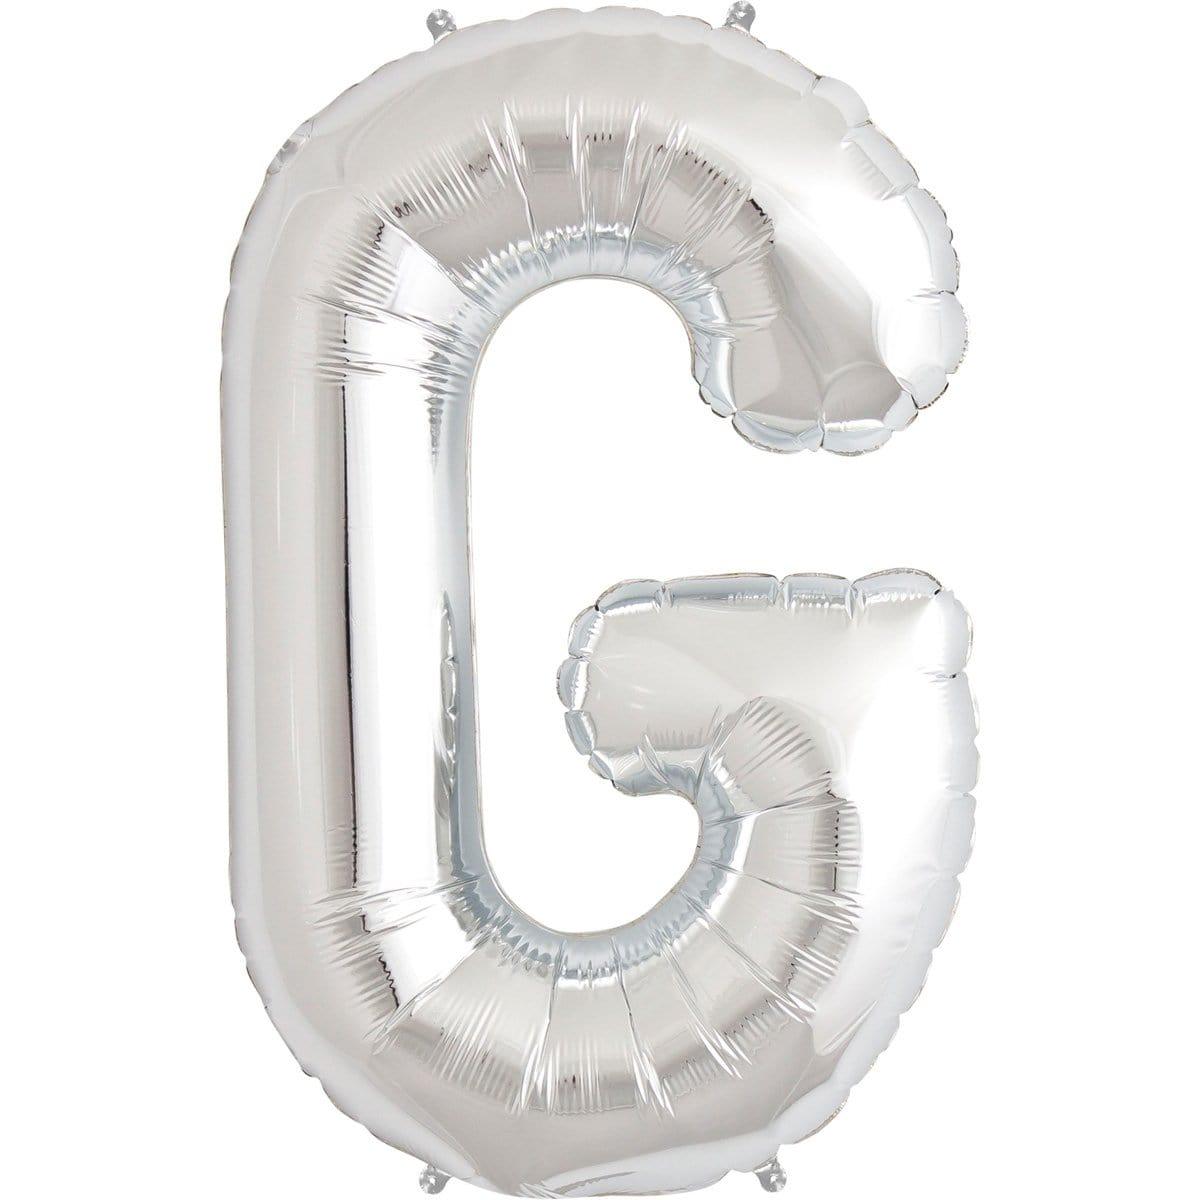 Buy Balloons Silver Letter G Foil Balloon, 34 Inches sold at Party Expert